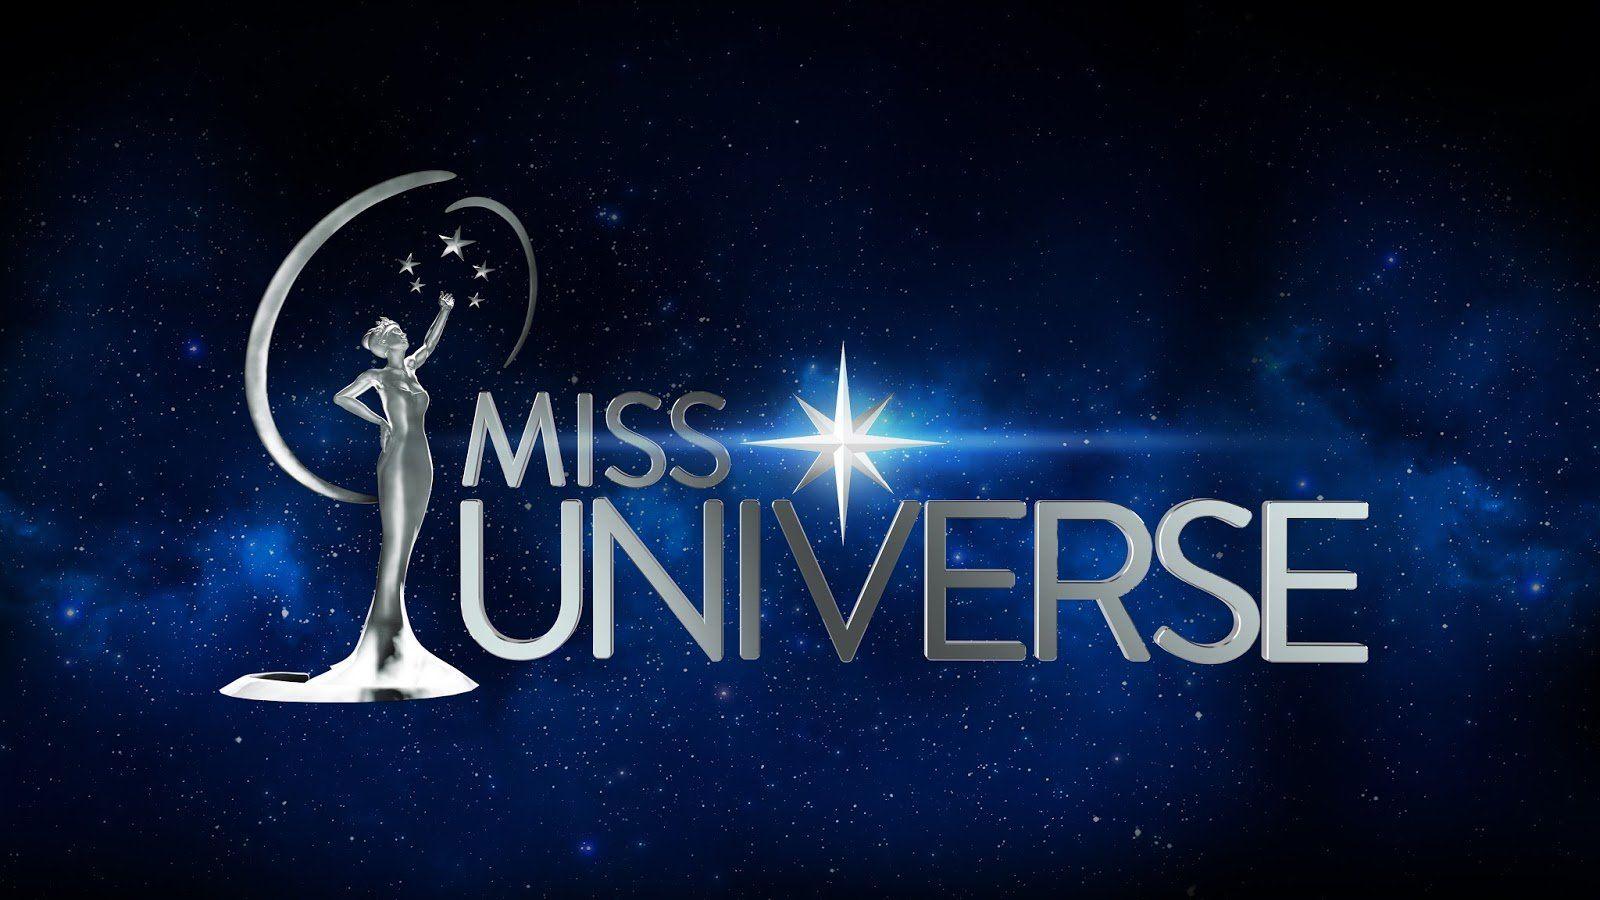 Miss Universe 2017. The Costa Rica News